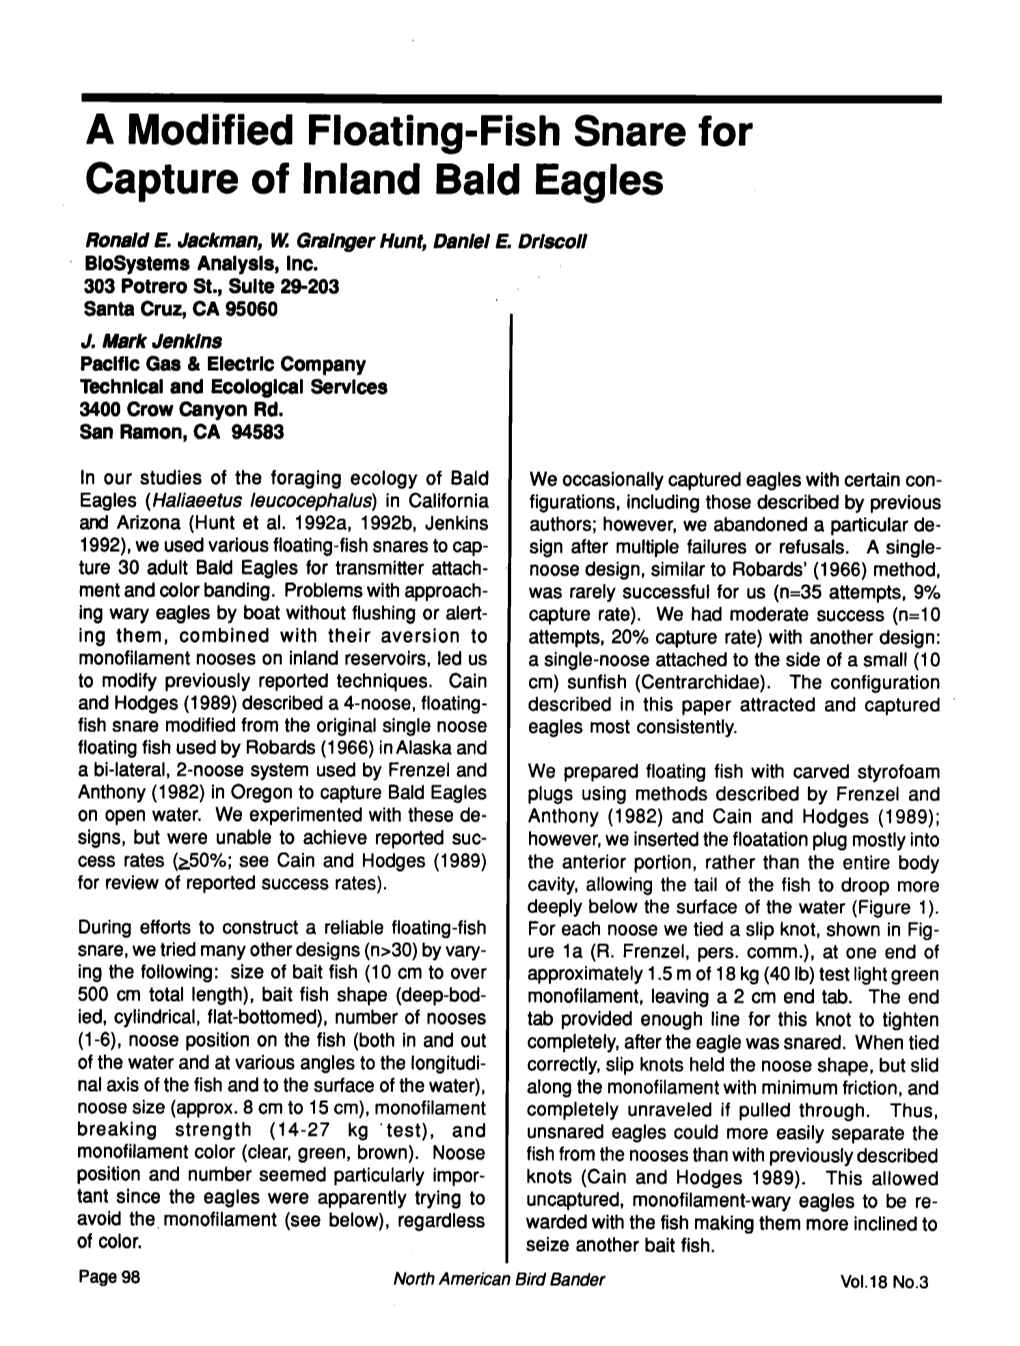 A Modified Floating-Fish Snare for Capture of Inland Bald Eagles